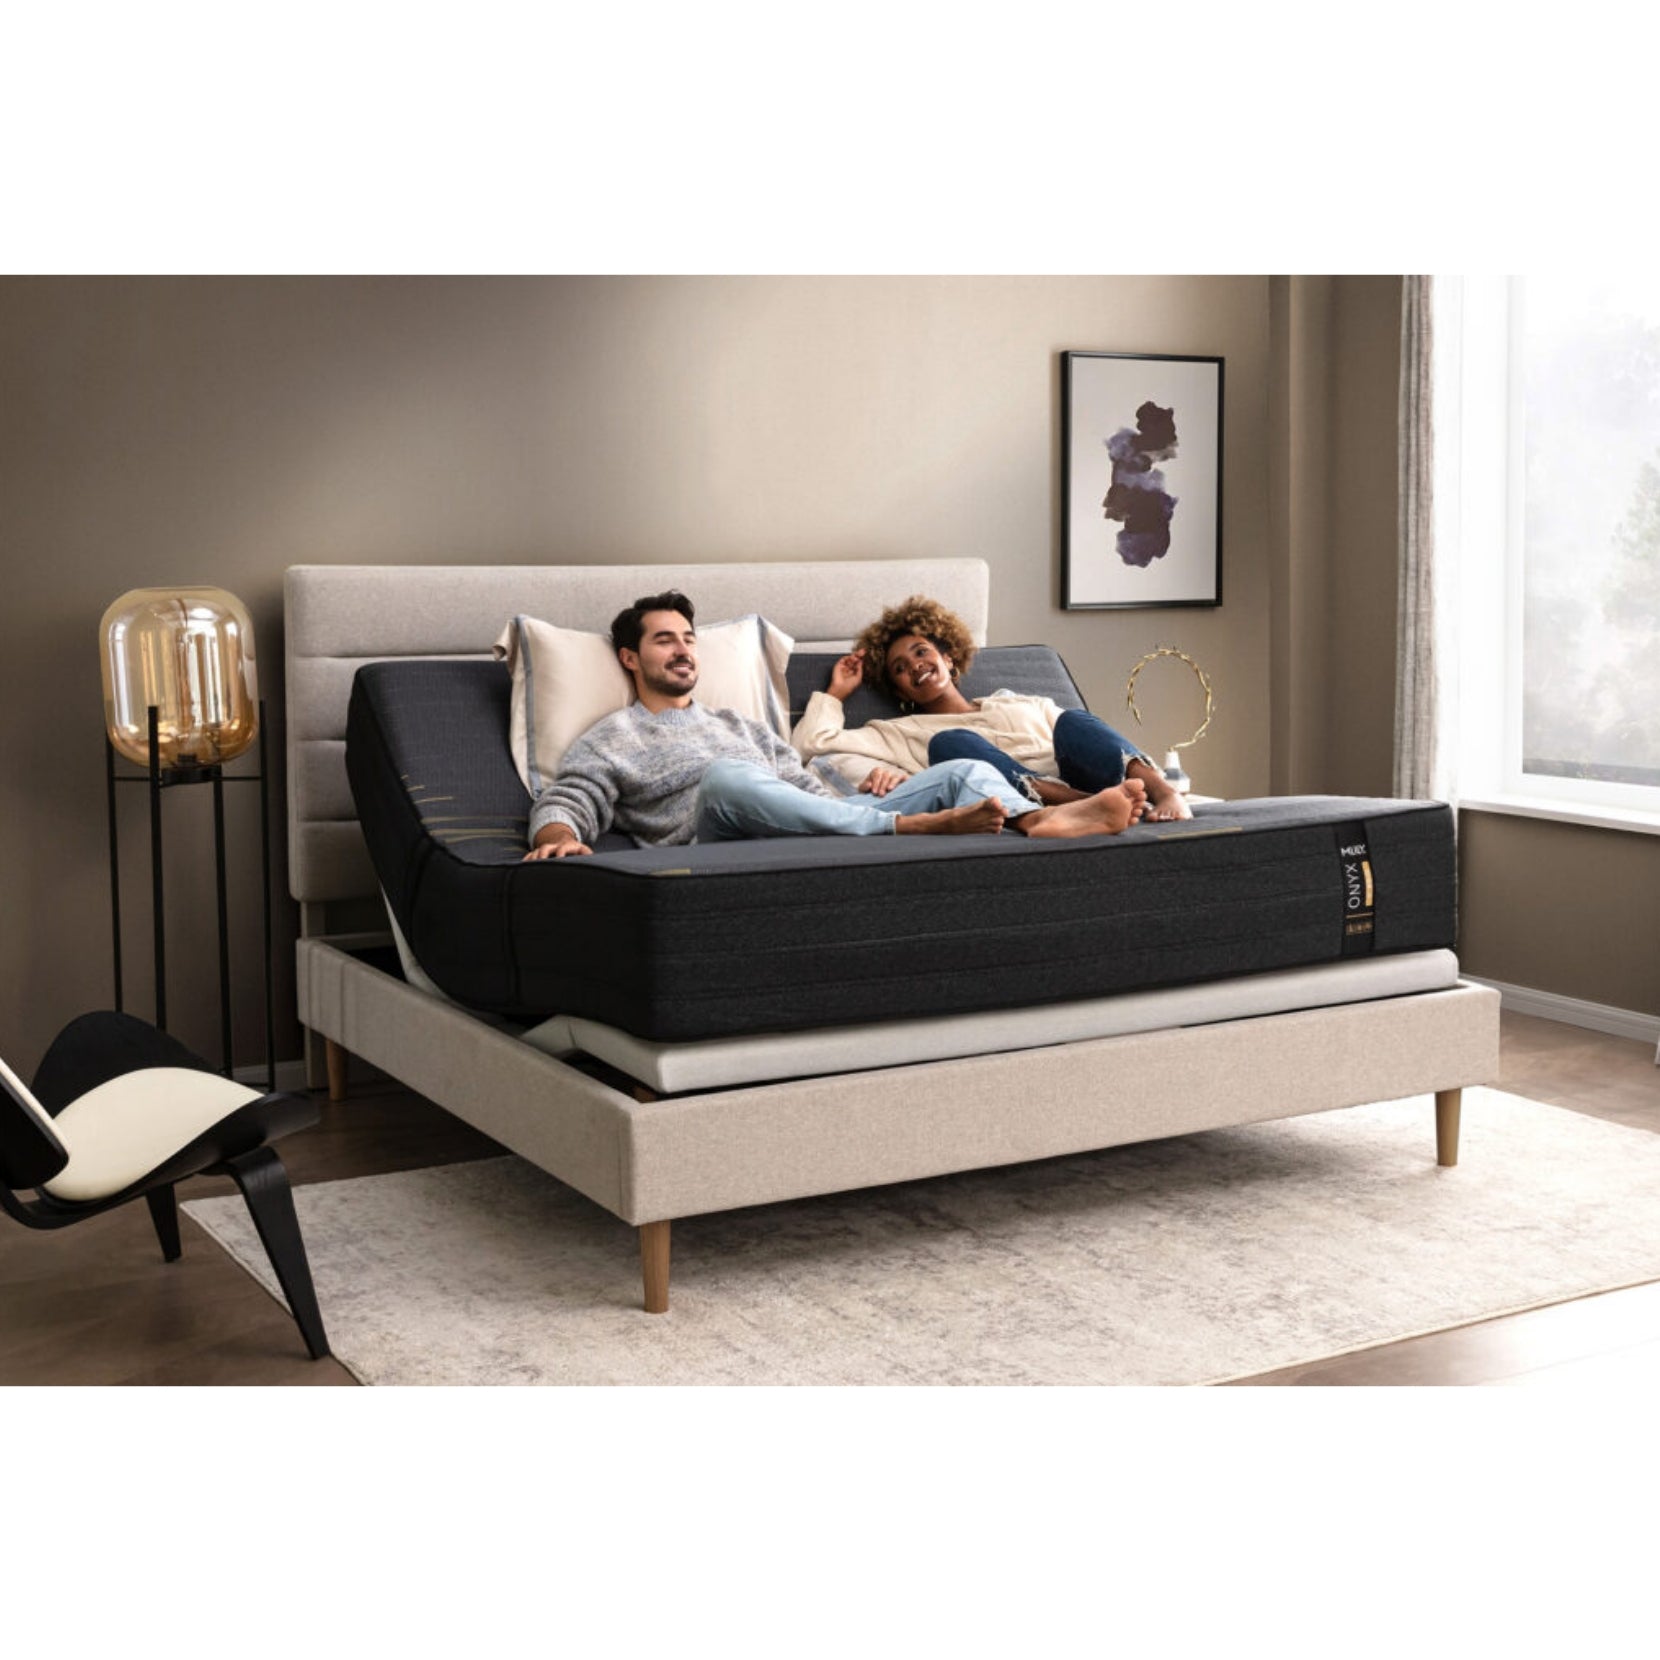 ONYX 12" Hybrid Mattress With Copper Infused Memory Foam Inside Of A Bedroom With A Man And Woman Enjoying Each Other's Company While Having Their Head And Foot Slightly Elevated